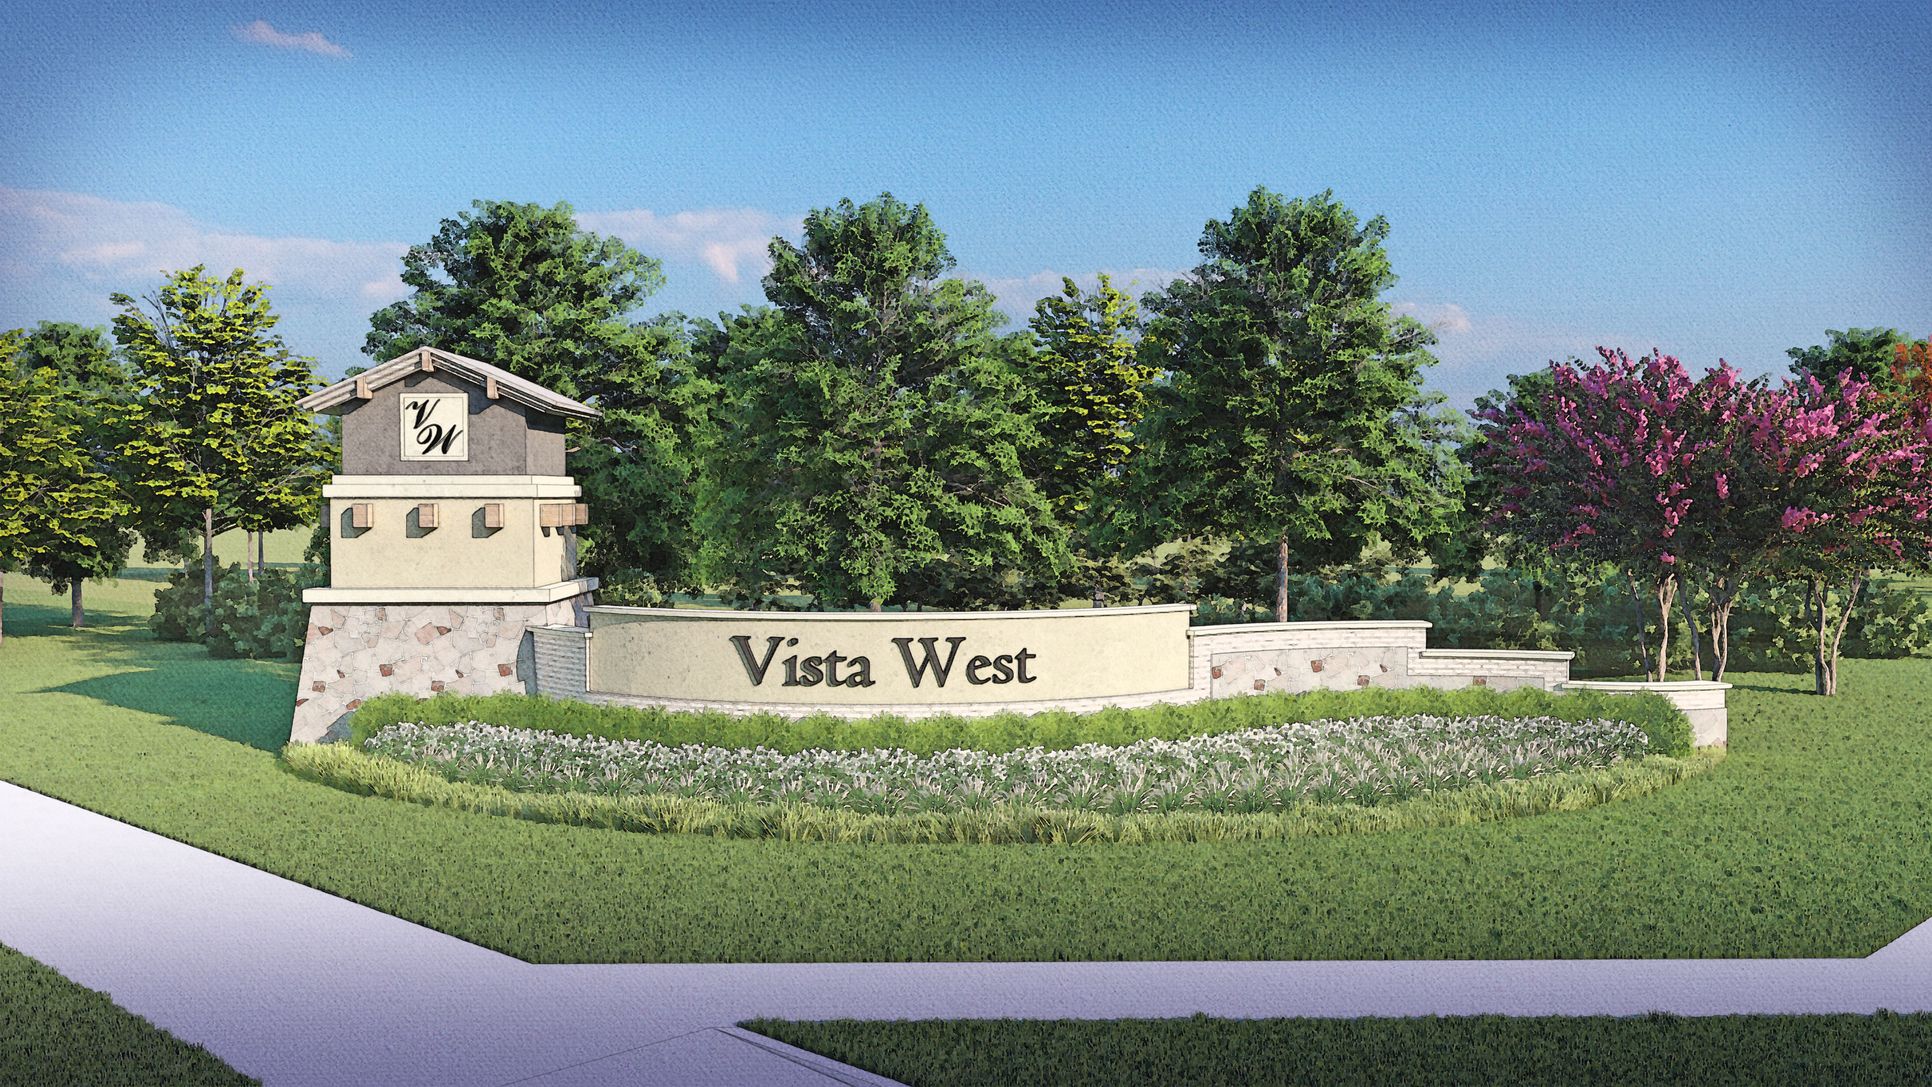 Vista West by LGI Homes:Entry monument at the front of the amenity-rich community